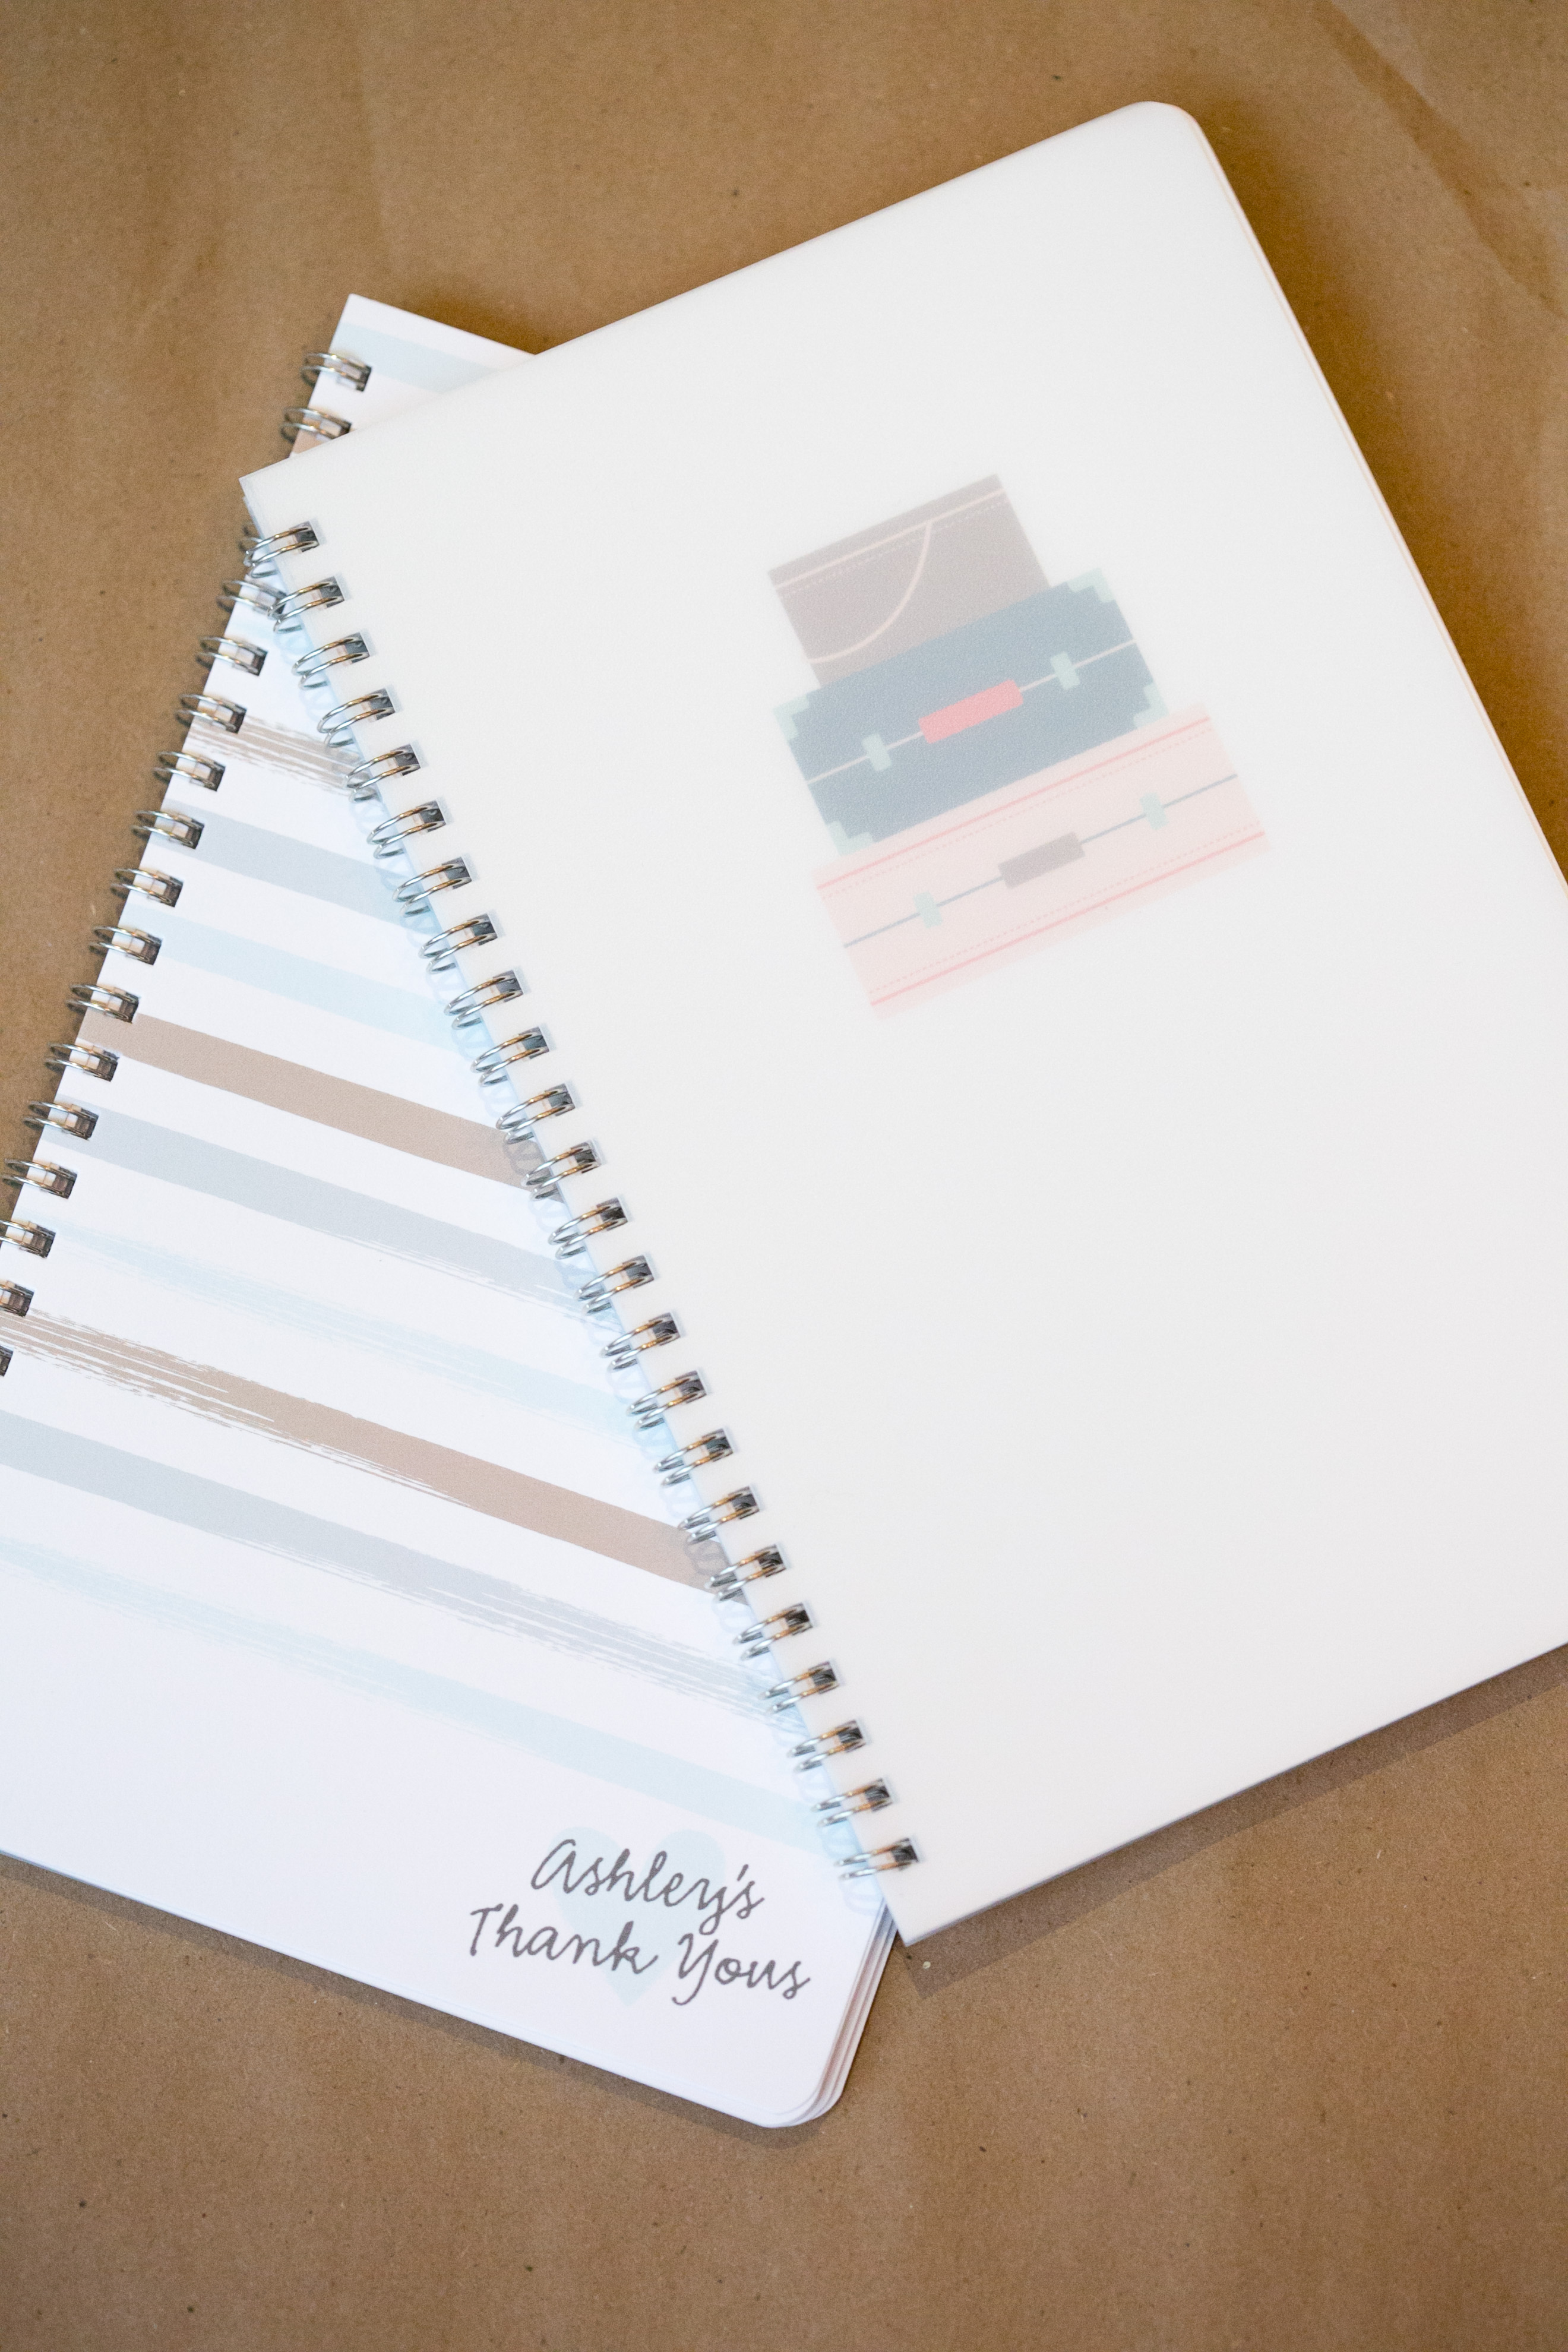 Personalized Spiral Bound Notebook from Minted